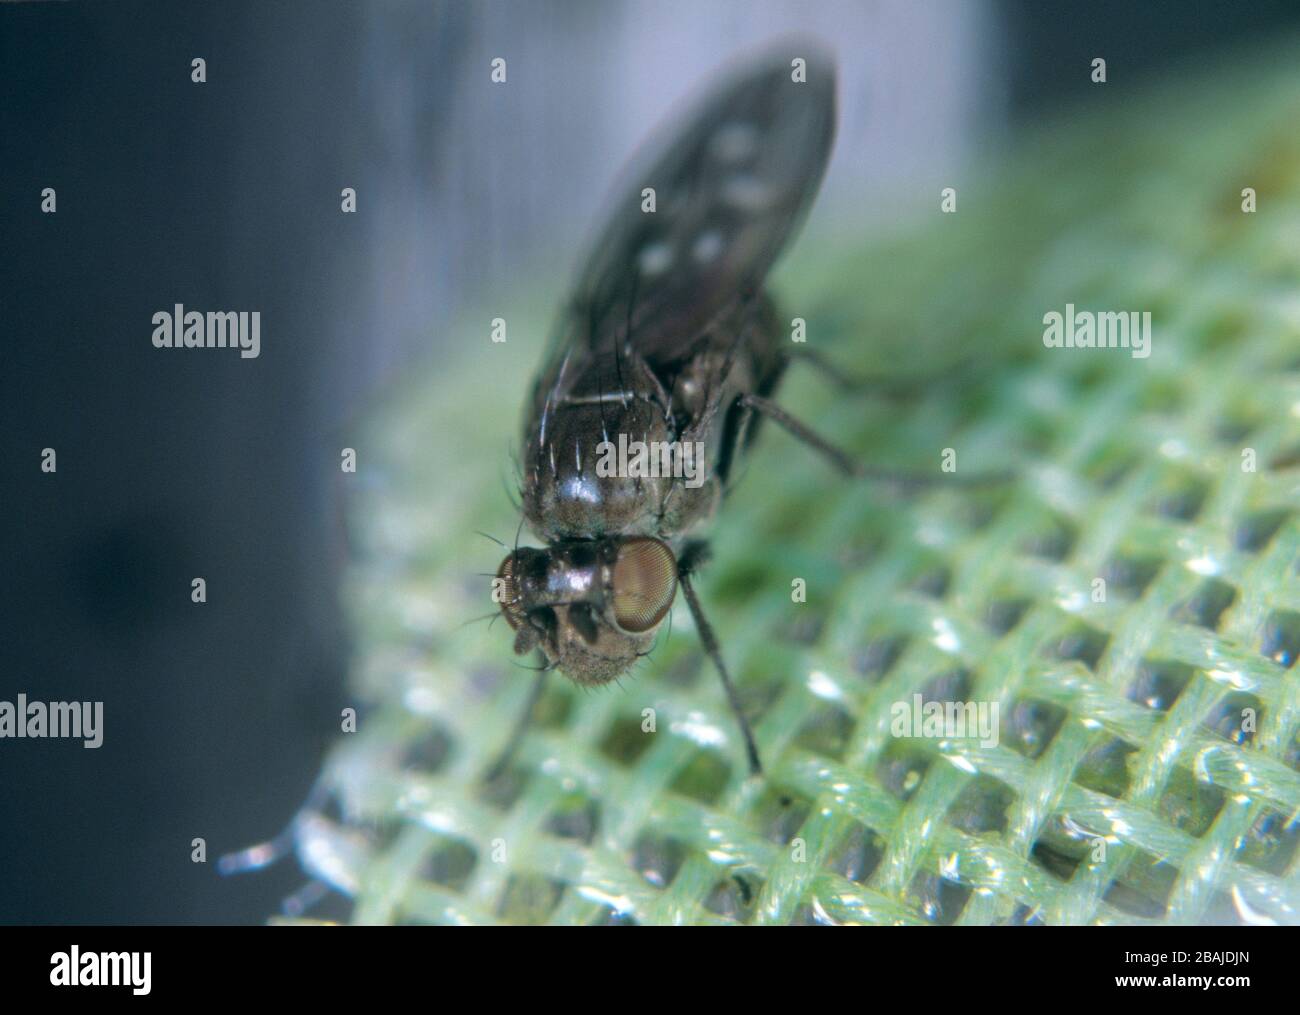 Shore fly or fungus fly (Scatella stagnalis) adult on glasshouse mesh. Shore flies contaminate lettuce crops Stock Photo